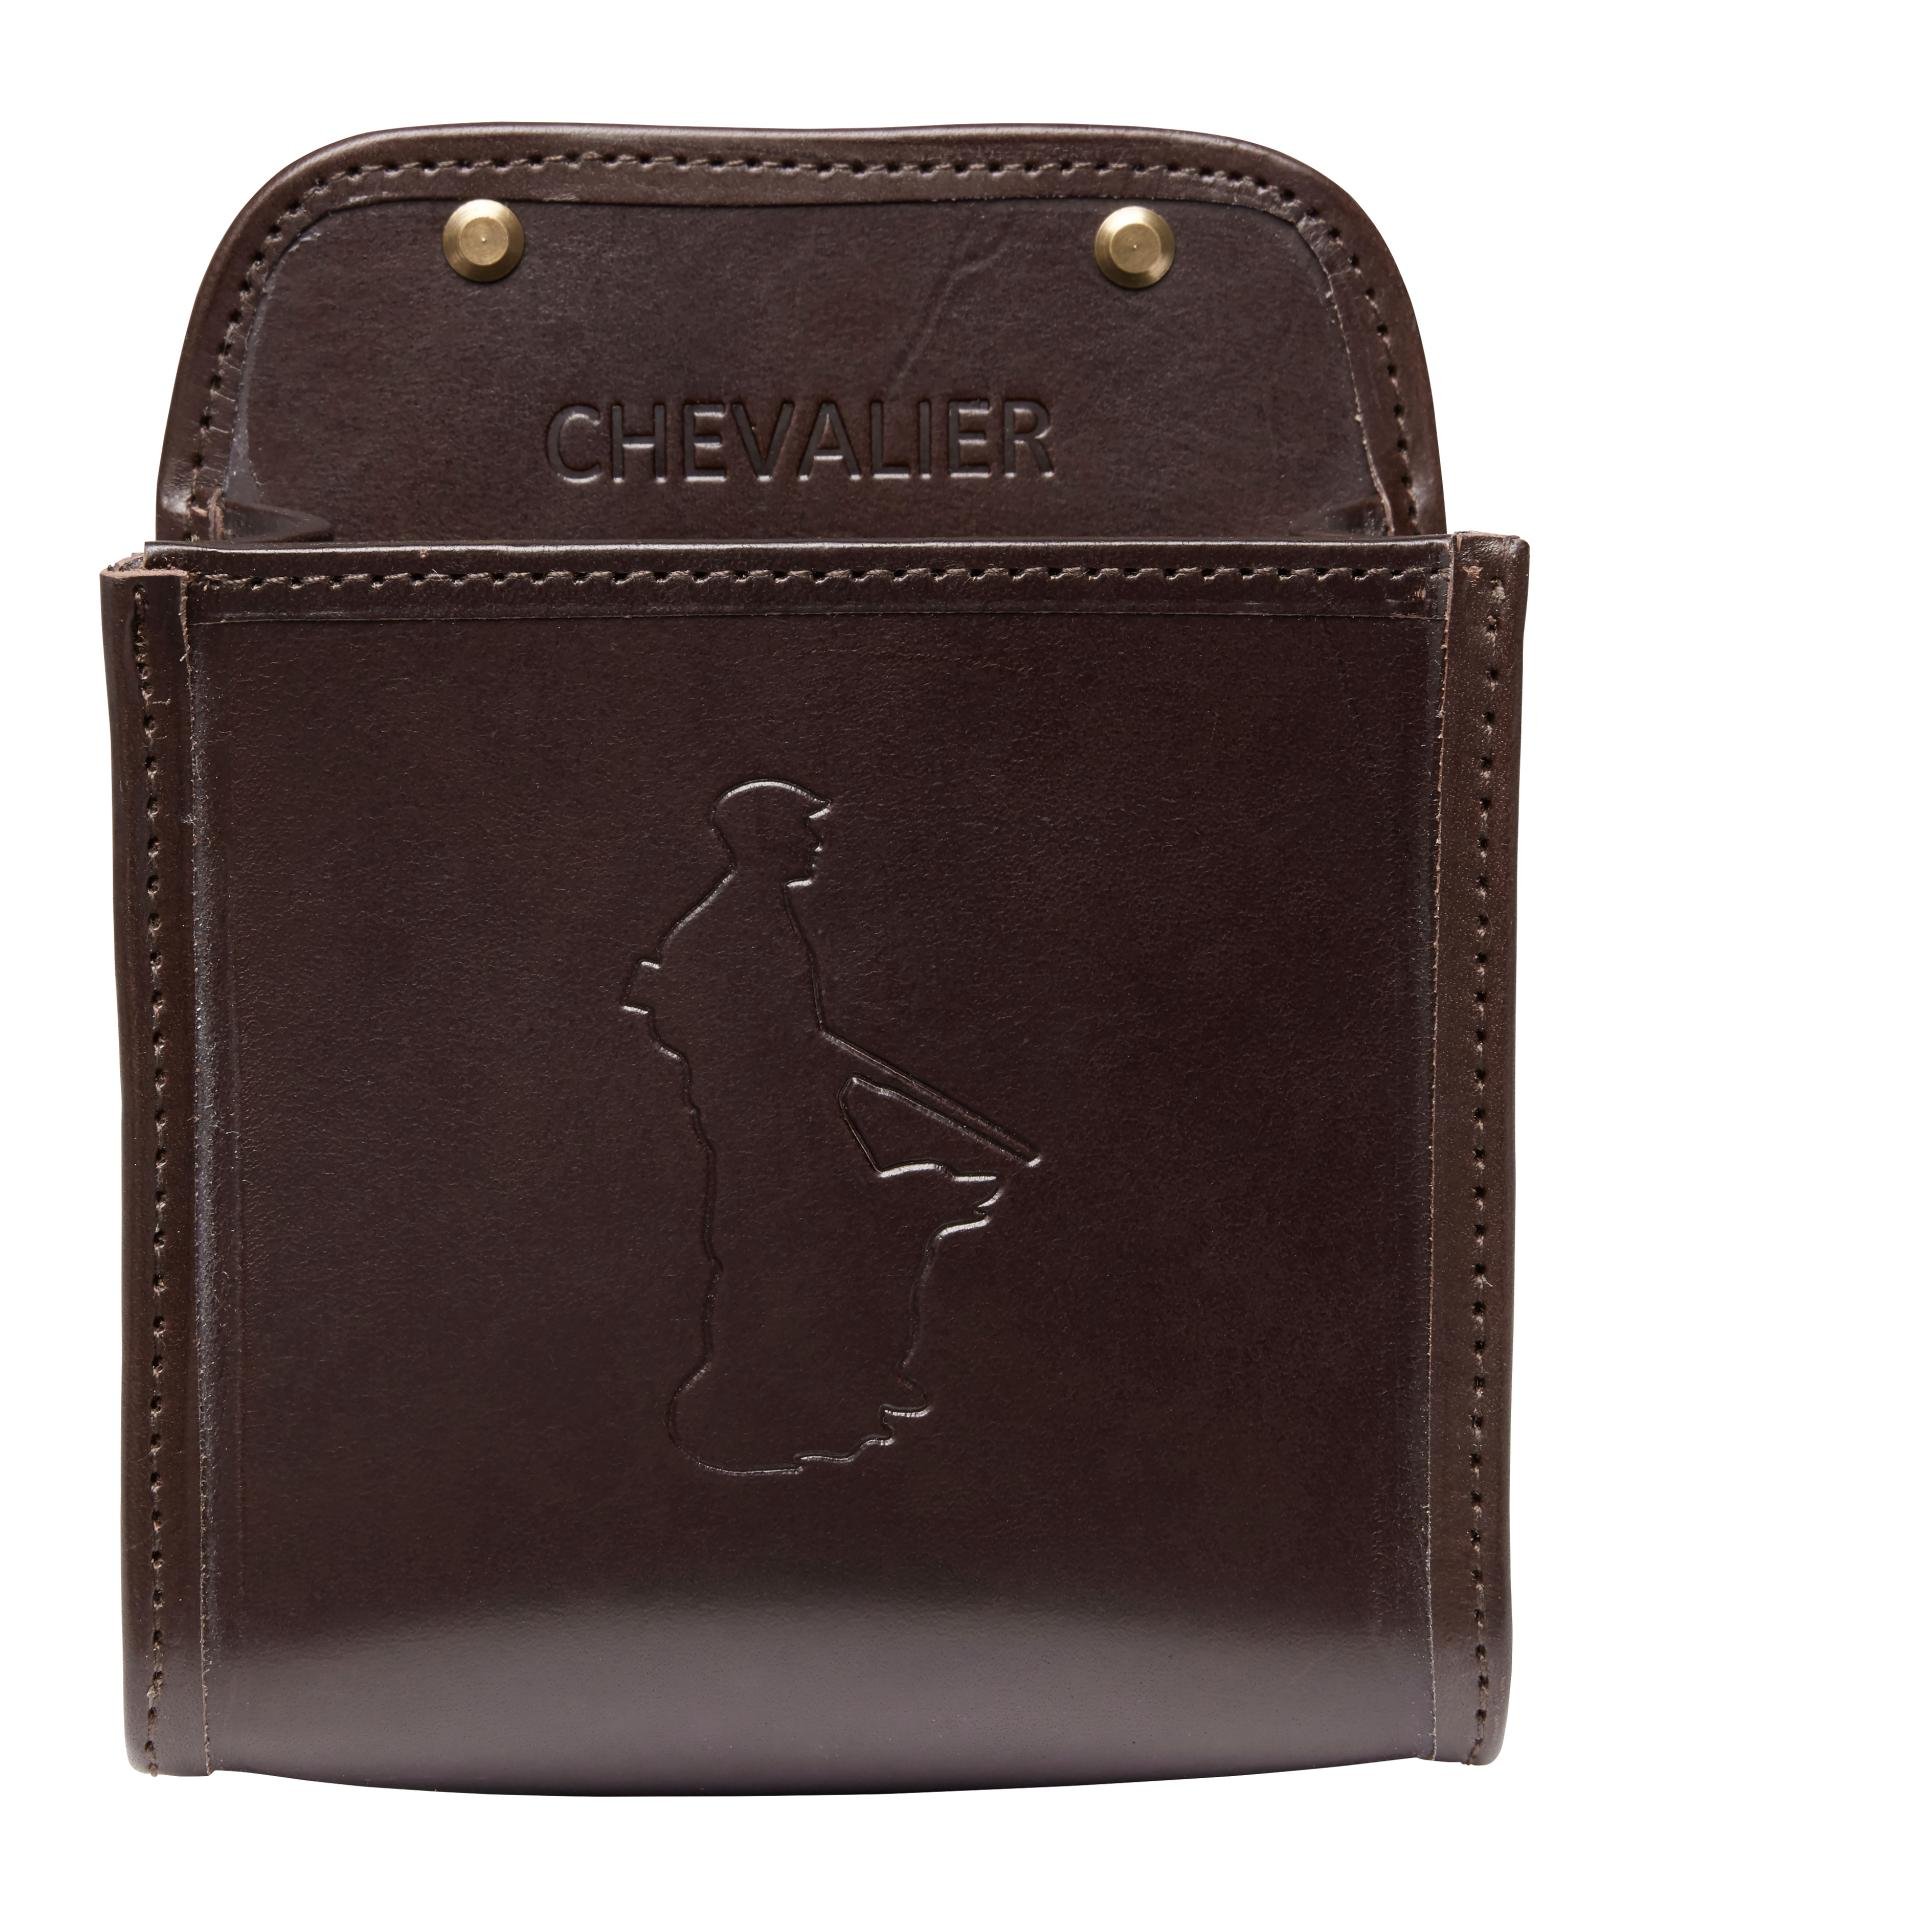 Chevalier Iver Leather Cartridge Bag